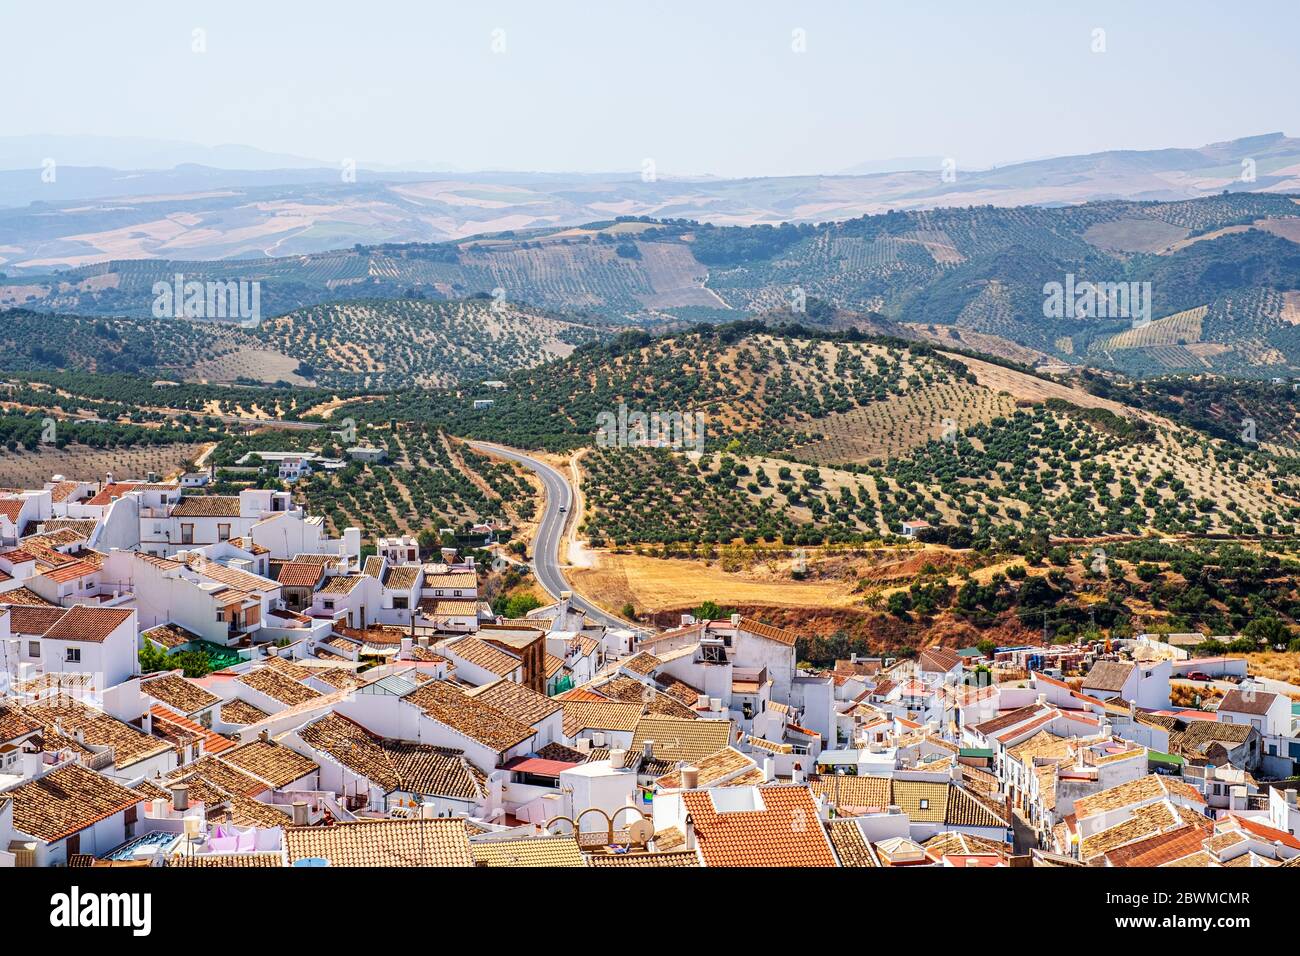 Olvera, Spain. Aerial view of old touristic town Olvera, Spain surrounded by mountains. Dry landscape in hot summer, white houses in Spanish village Stock Photo